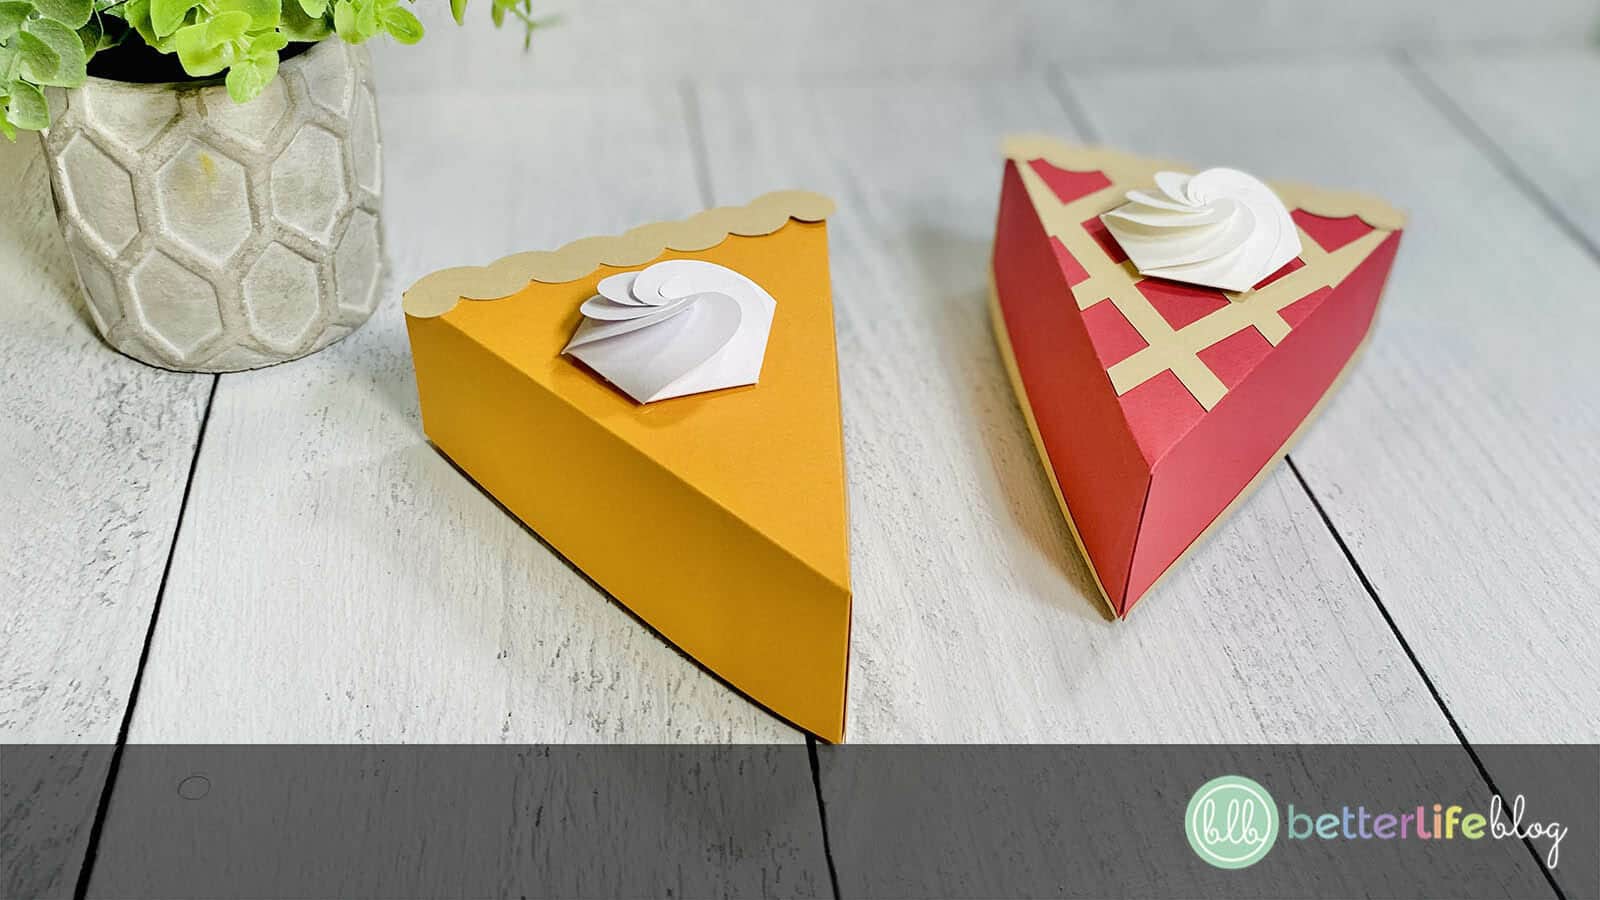 This Cricut Pie Slice Box is the perfect addition to your holiday dinner parties. They’re great for handing out leftover pie slices to your guests… so don’t let another slice of pie go to waste!